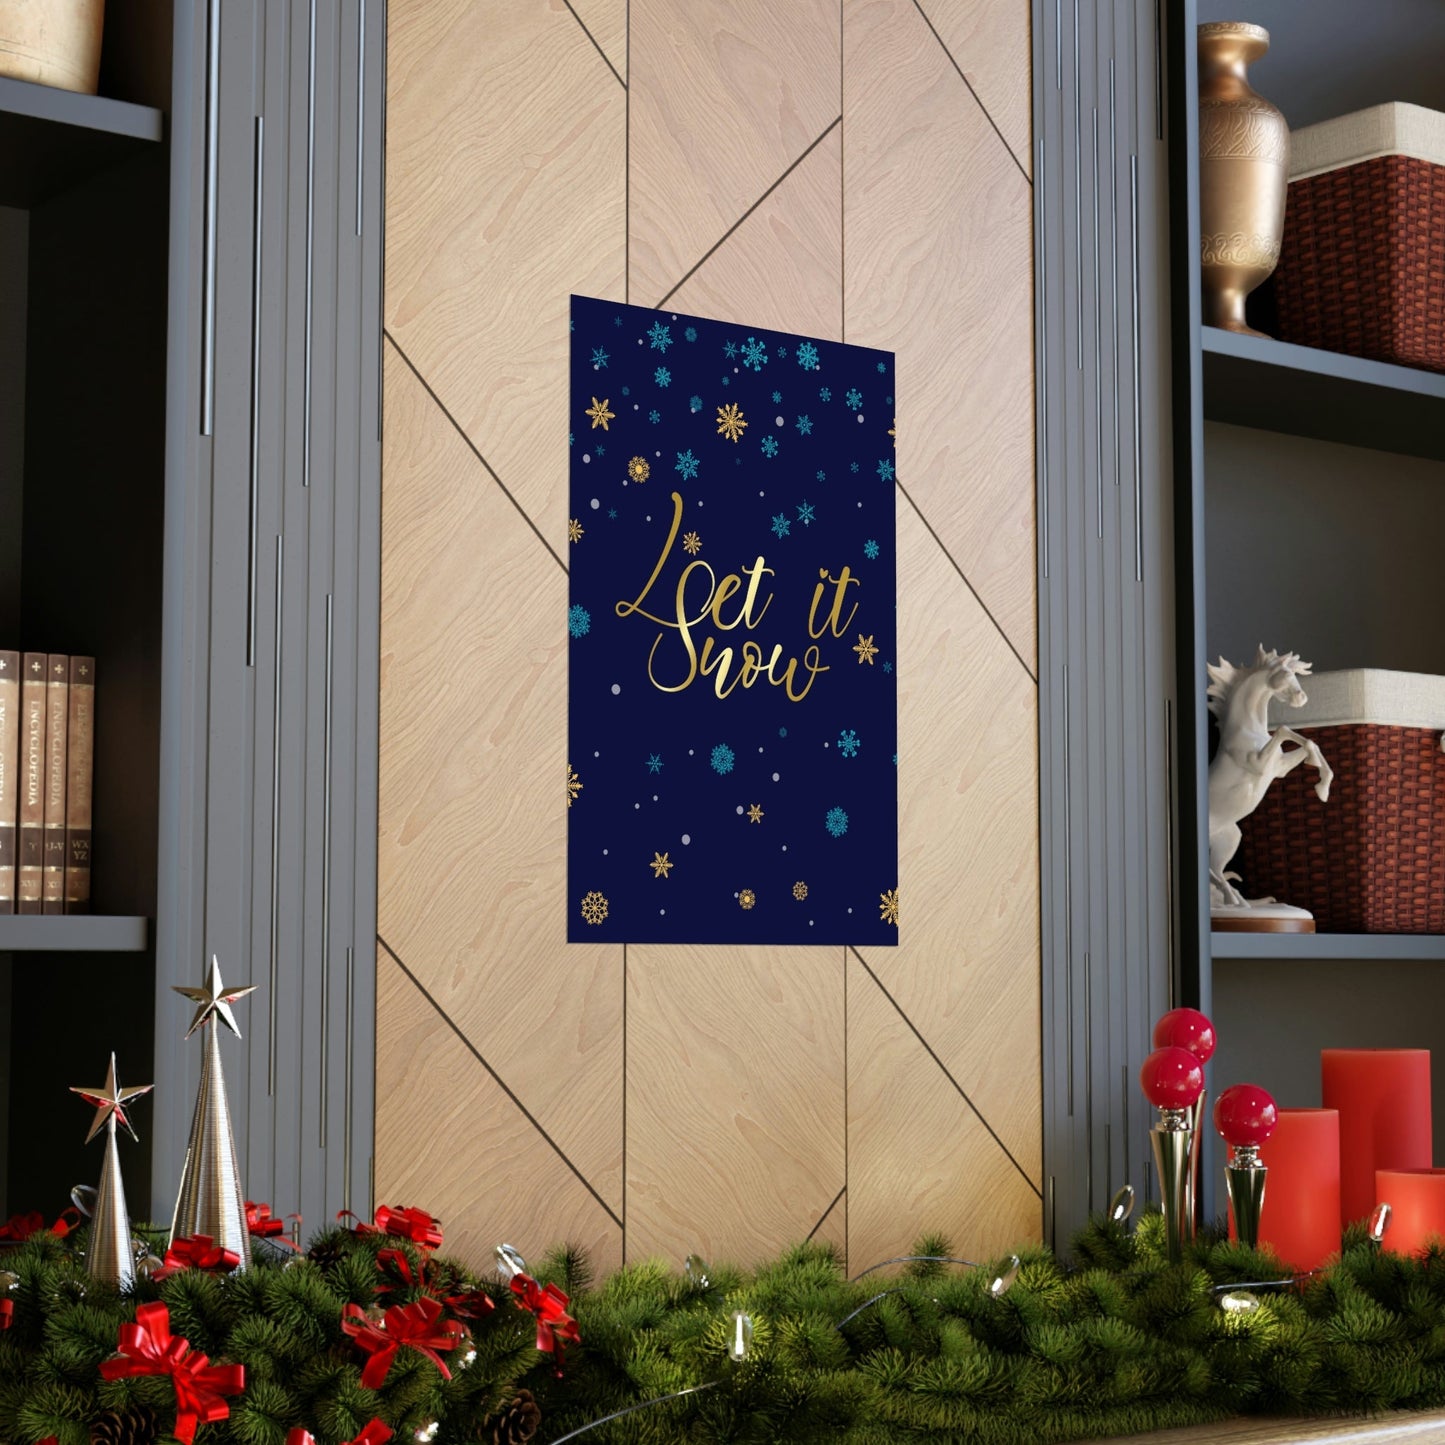 Let it Snow Pattern Christmas Typography Art Premium Matte Vertical Posters Ichaku [Perfect Gifts Selection]